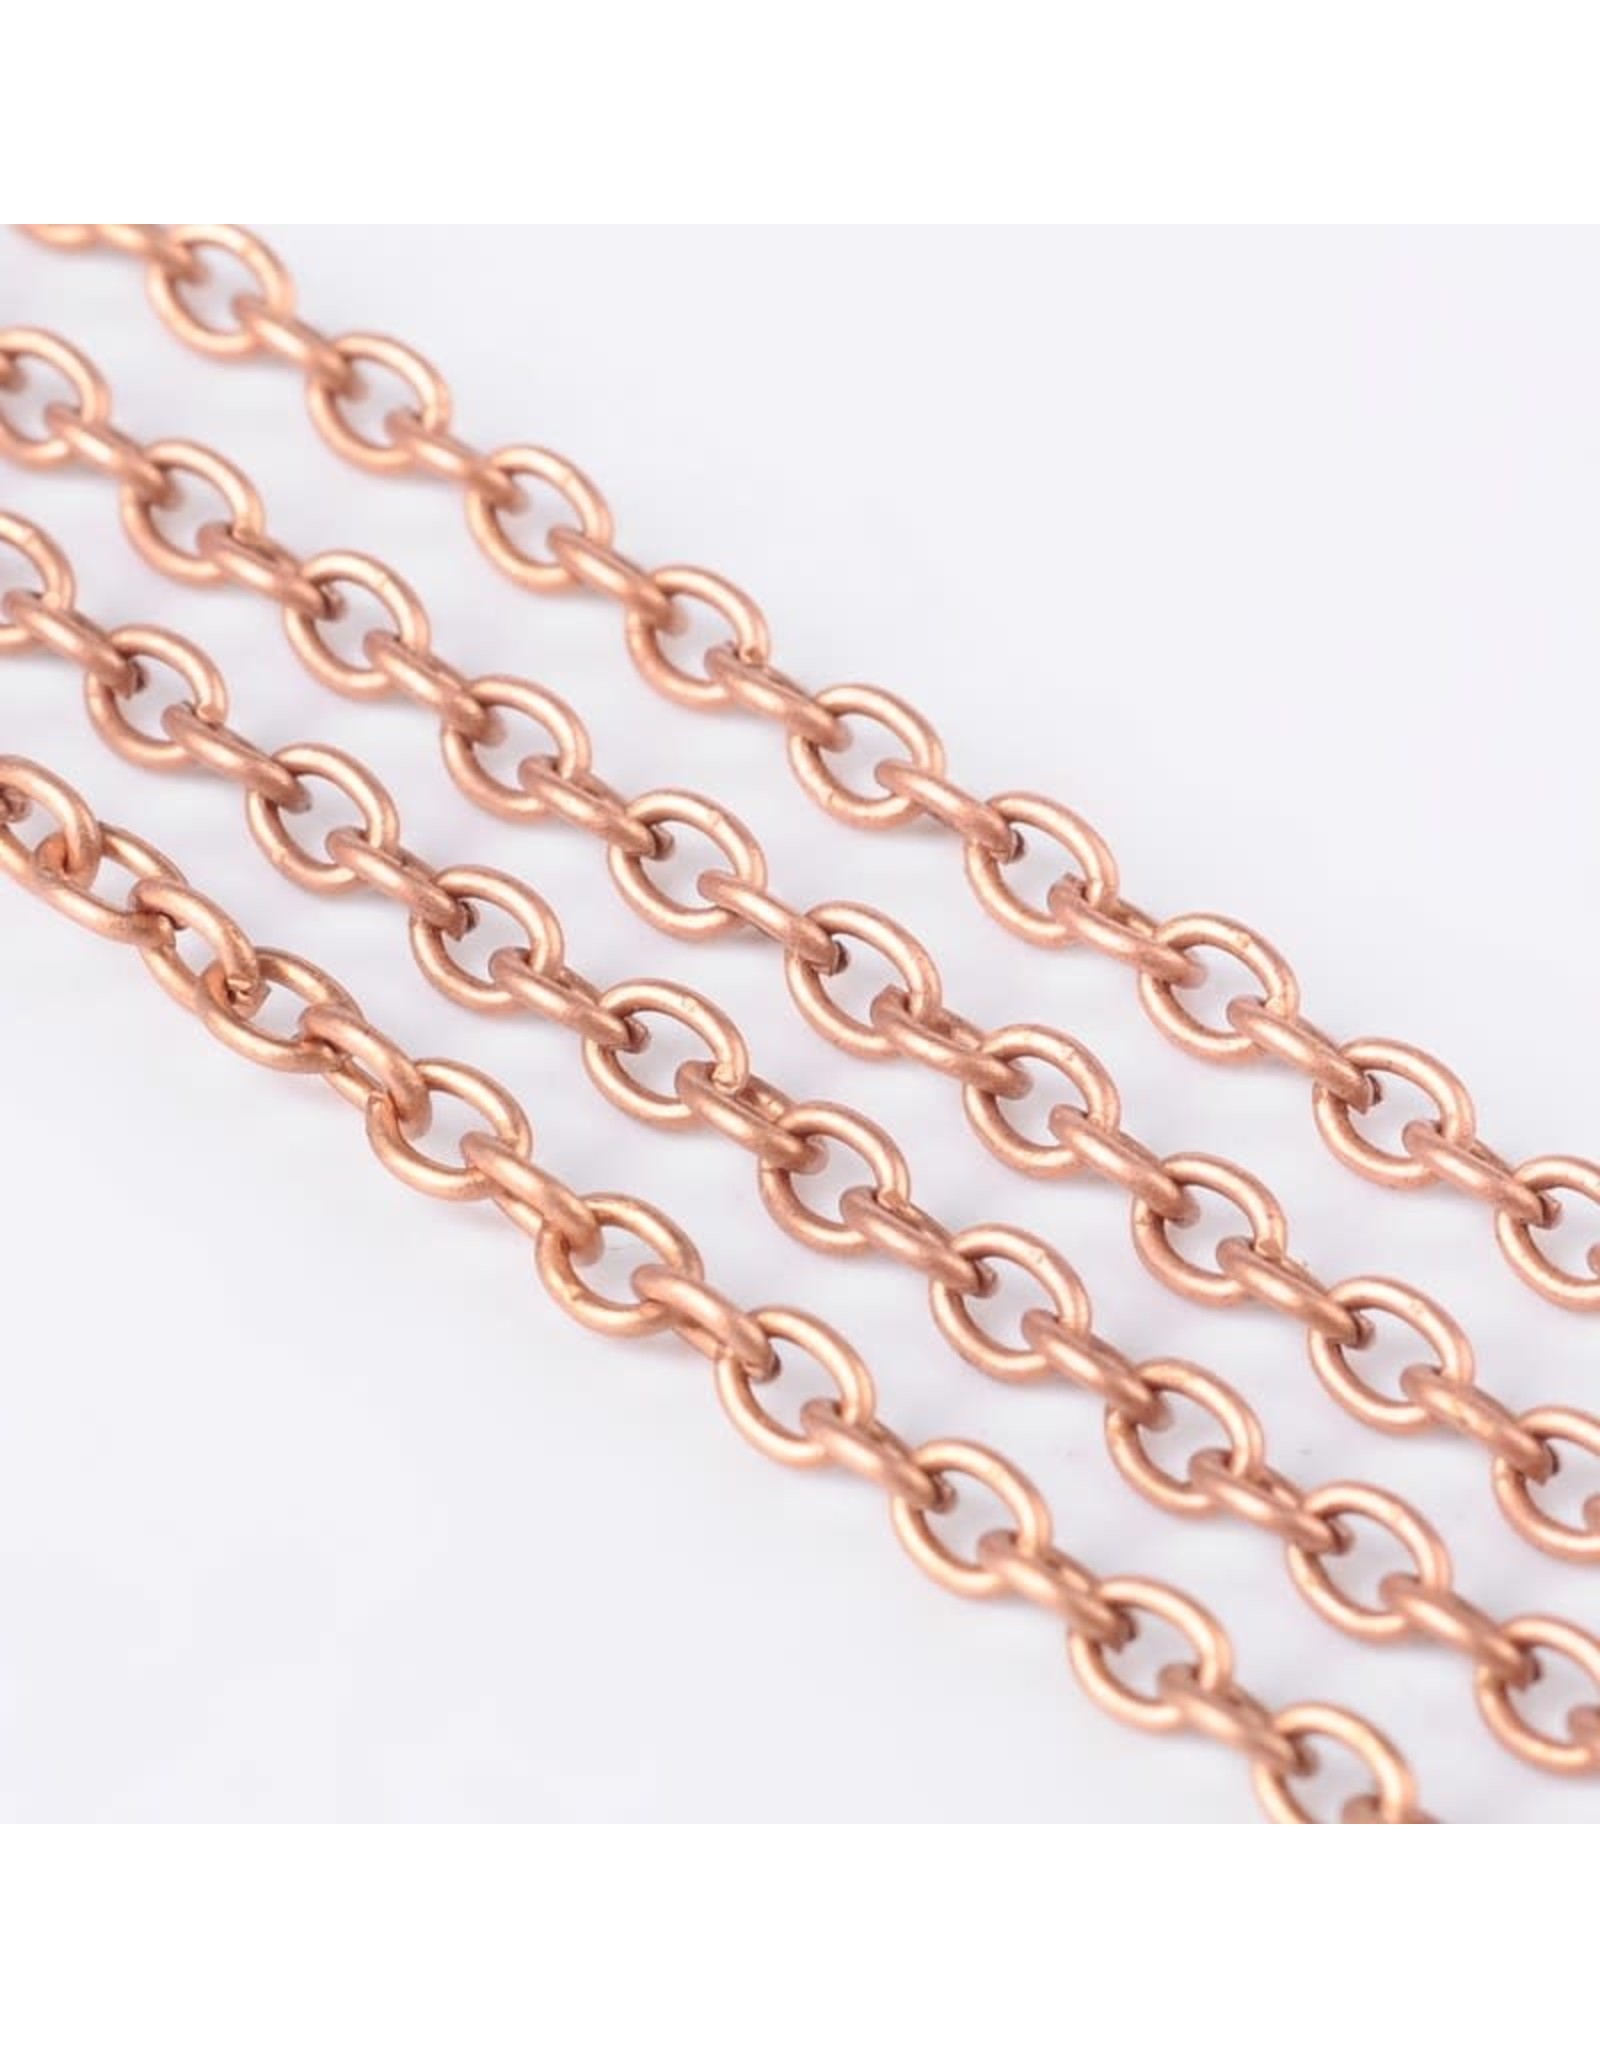 #7 Cable Chain 3x2mm   Antique Copper  16 Feet  NF